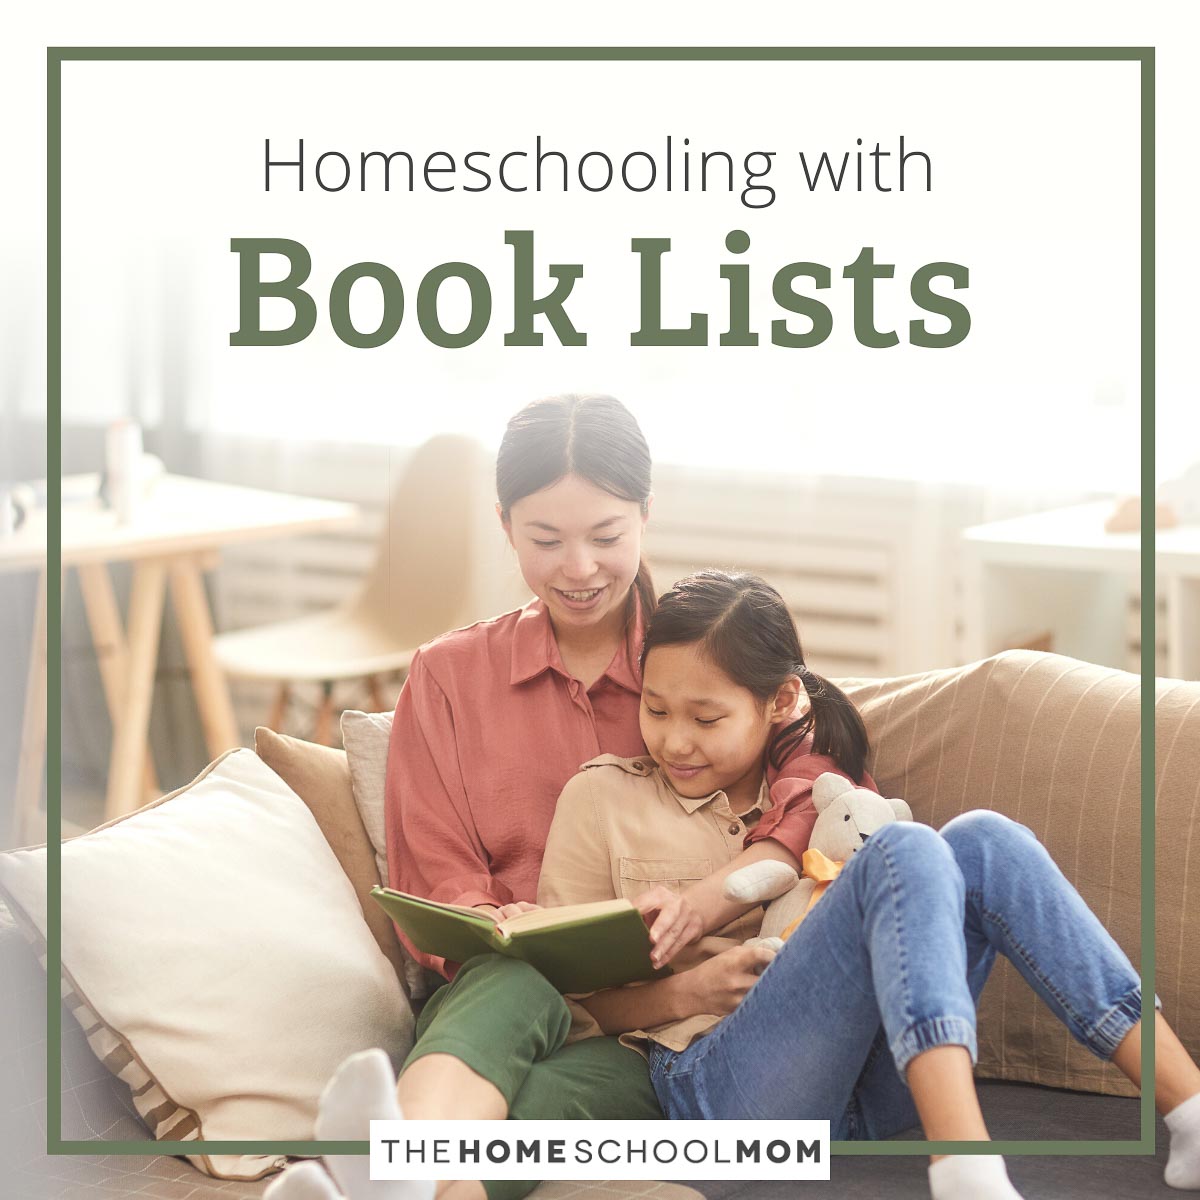 Homeschooling with Book Lists